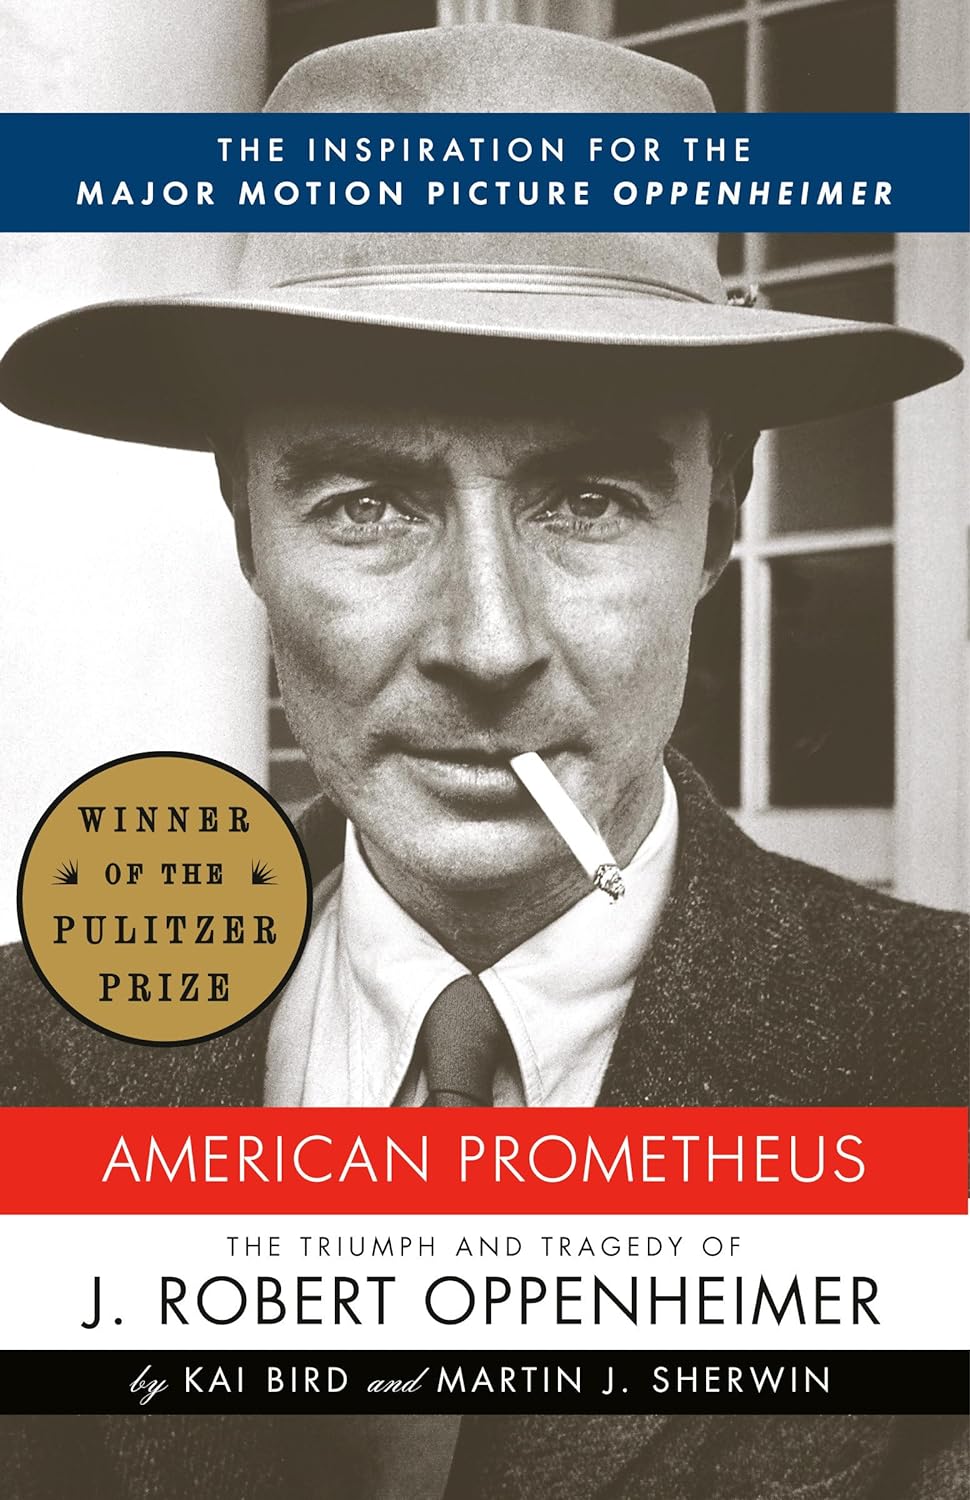 American prometheus :  the inspiration for the major motion picture oppenheimer